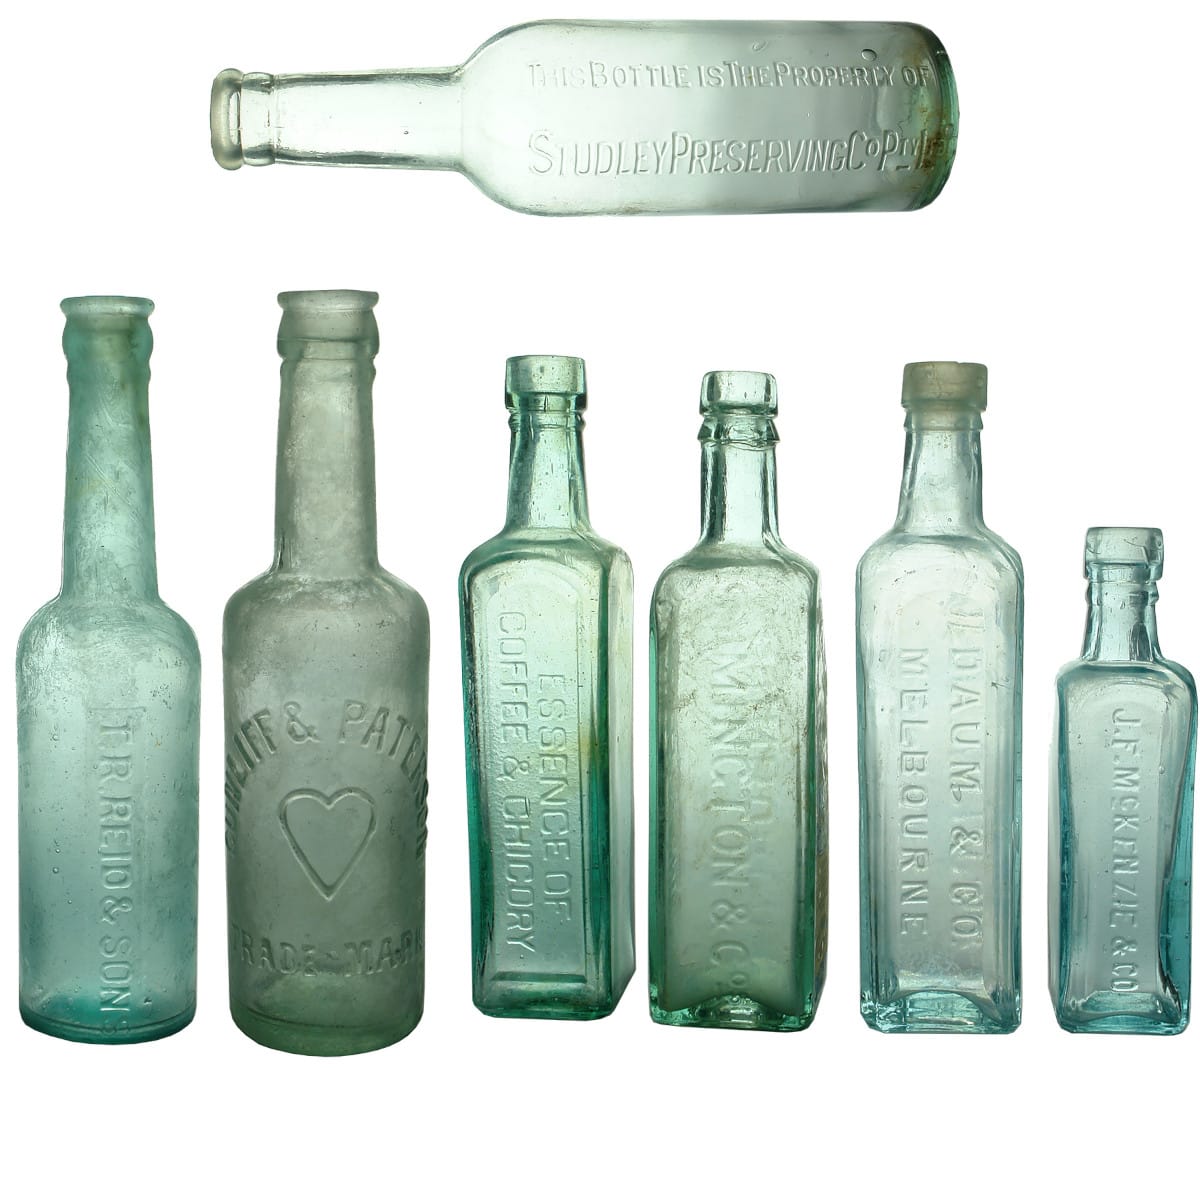 7 Household Bottles: Studley Preserving Co; Cunliff & Paterson; T. R. Reid & Sons; 4 x Coffee Essences.